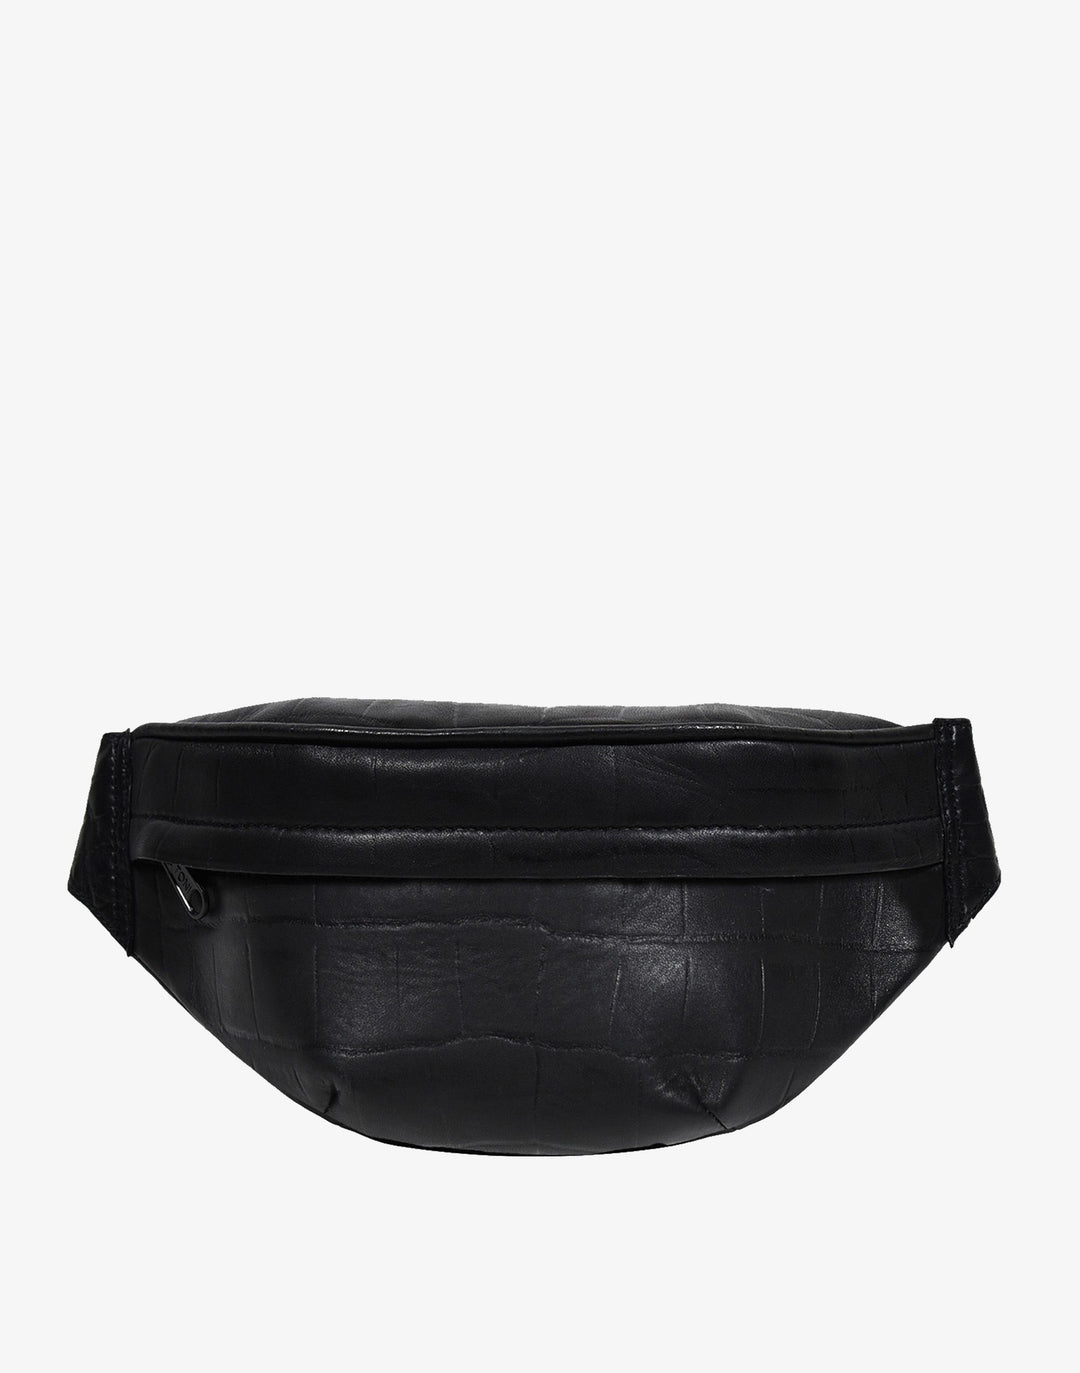 HYER GOODS Upcycled Leather Fanny Pack